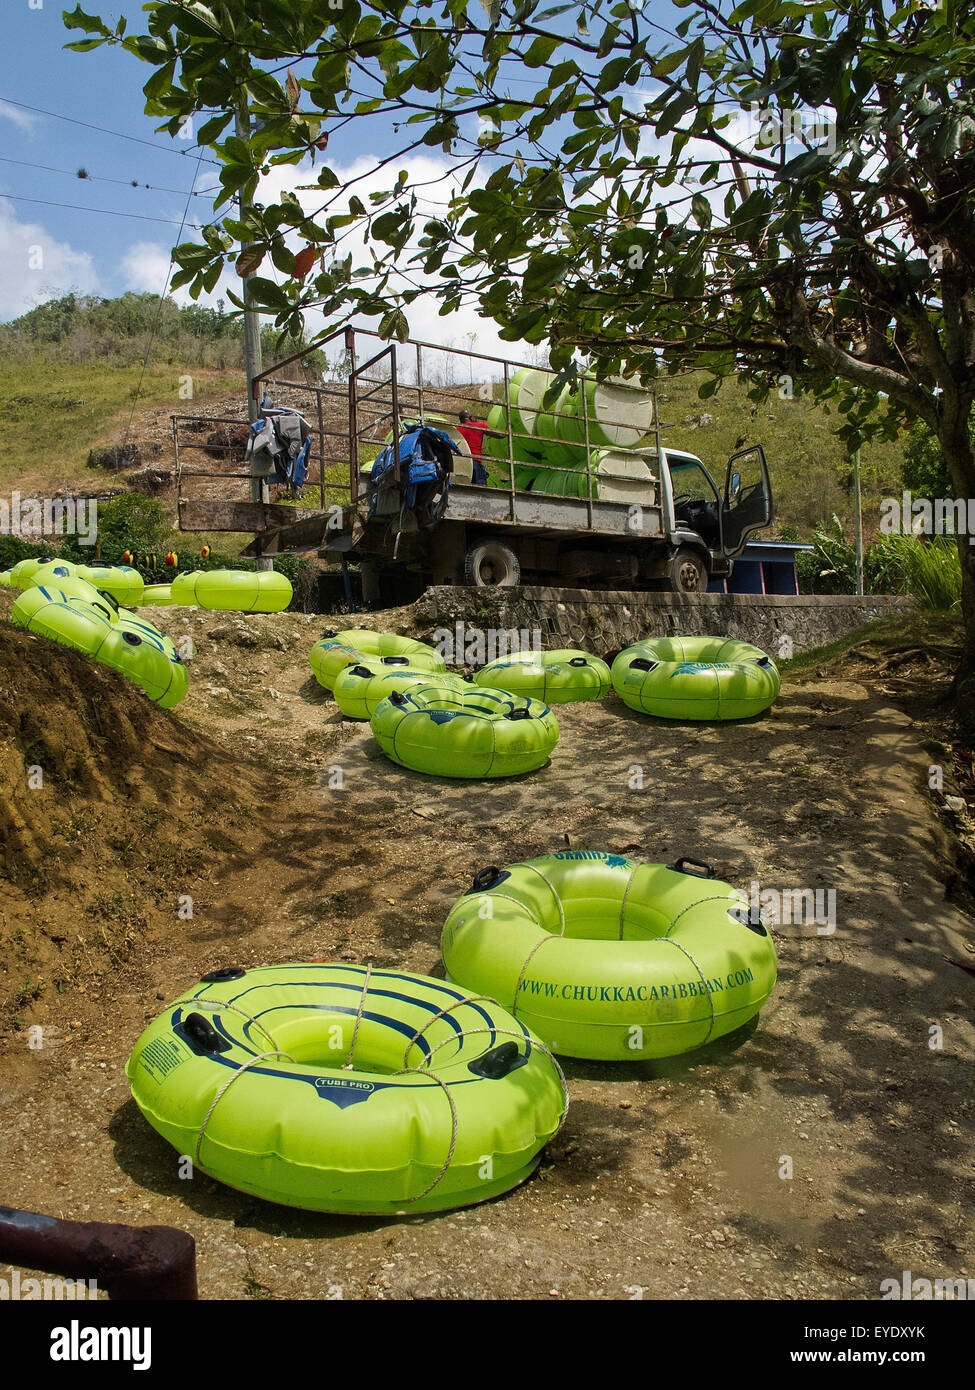 Inflatable inner tubes on the bank of the White River, Ocho Rios, St. Ann, Jamaica Stock Photo